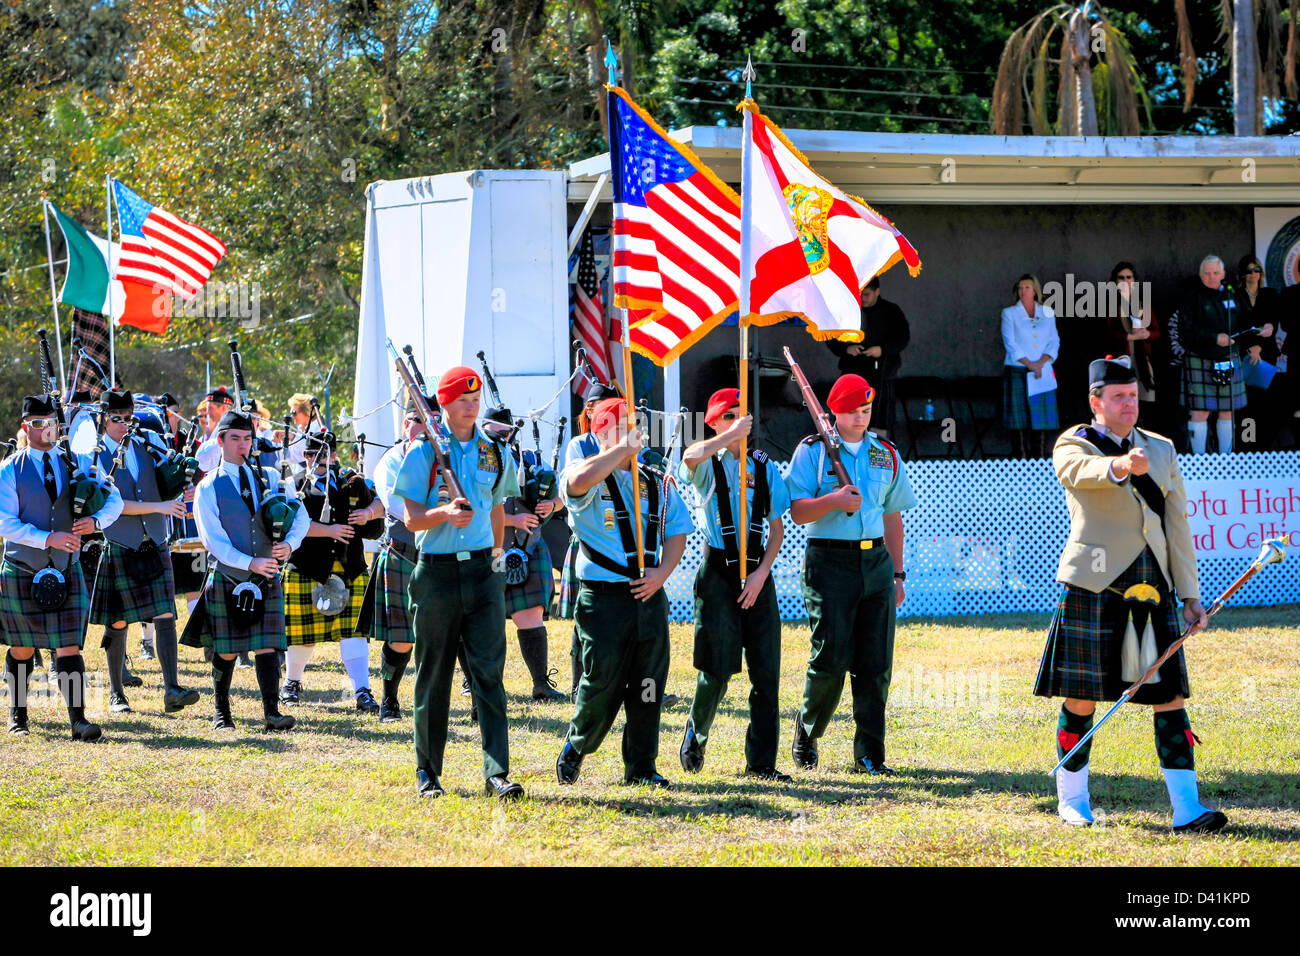 Entrance of the Scottish pipe bands at the Sarasota Highland Games